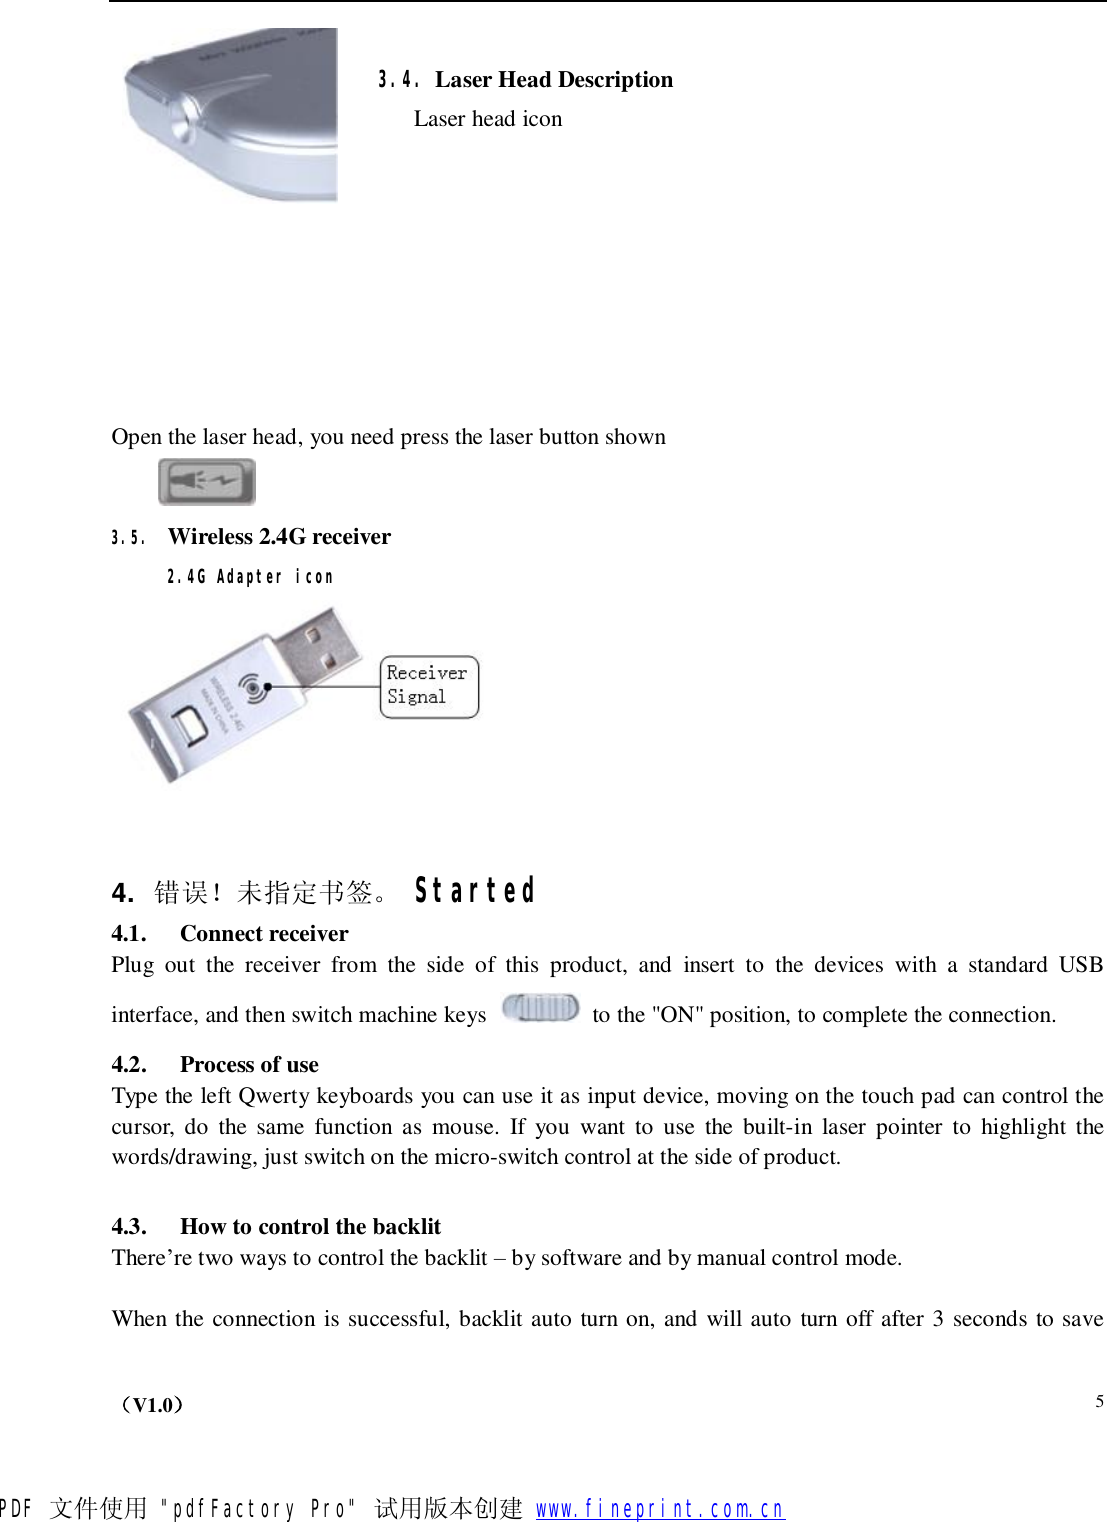    （V1.0）  5 3.4. Laser Head Description Laser head icon            Open the laser head, you need press the laser button shown  3.5. Wireless 2.4G receiver 2.4G Adapter icon   4.  错误！未指定书签。 Started 4.1.  Connect receiver Plug out the receiver from the side of this product, and insert to the devices with a standard USB interface, and then switch machine keys   to the &quot;ON&quot; position, to complete the connection. 4.2.  Process of use Type the left Qwerty keyboards you can use it as input device, moving on the touch pad can control the cursor, do the same function as mouse. If you want to use the built-in laser pointer to highlight the words/drawing, just switch on the micro-switch control at the side of product.  4.3.  How to control the backlit There’re two ways to control the backlit – by software and by manual control mode.   When the connection is successful, backlit auto turn on, and will auto turn off after 3 seconds to save PDF 文件使用 &quot;pdfFactory Pro&quot; 试用版本创建           www.fineprint.com.cn